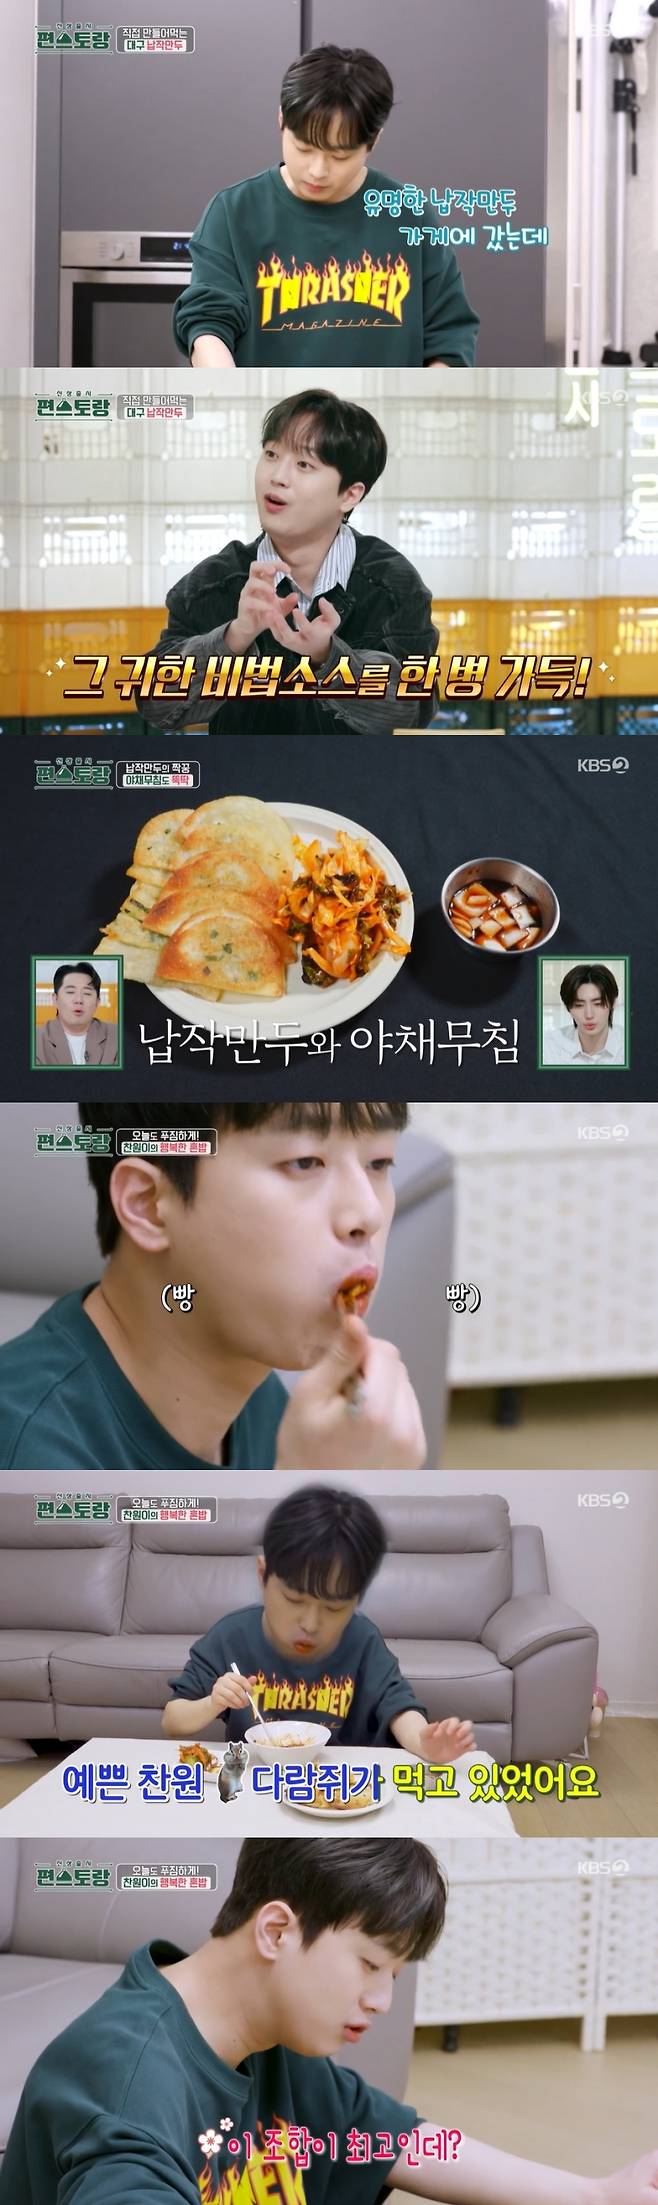 According to Nielsen Korea, a TV viewer rating company on the 24th, KBS 2TV Stars Top Recipe at Fun-Staurant (hereinafter referred to as Stars Top Recipe at Fun-Staurant ), Which is 4.3% higher than the previous week.On this day, Ryu Soo-young, Cha Ye-ryun, and Lee Chan-won presented the delicacies to blow the heat in one room with the theme of taste of summer.Among them, Lee Chan-won made various side dishes using his favorite Cucumber.Lee Chan-wons side dish parade, which I like so much that I started to eat at the age of 18 when I was a high school student, started to admire Cucumber,Lee Chan-won did not stop here, but also made bibim noodles with cucumber paper and cod dumplings.Lee Chan-won cooked five flat dumplings, which were made by putting a little bit of seasoned vermicelli and leek directly on the dumplings, and frying them in oil.Lee Chan-wons happy rice bowl was completed.The scene of Lee Chan-won eating filth with a mouthful of homemade flat dumplings was as cute as a squirrel eating an acorn, which soared to 6.2% of TV viewer ratings per minute.Lee Chan-wons cooking room and food show always give a happy smile to viewers.It is noteworthy that Lee Chan-won will show the final menu of Summer Taste and win another championship.Ryu Soo-youngs diet sandwich and white cold noodle recipe were also revealed.Cha Ye-ryun invited her best friend Jin Seo-yeon to her home and presented a Jin Seo-yeon customized health cooking parade.